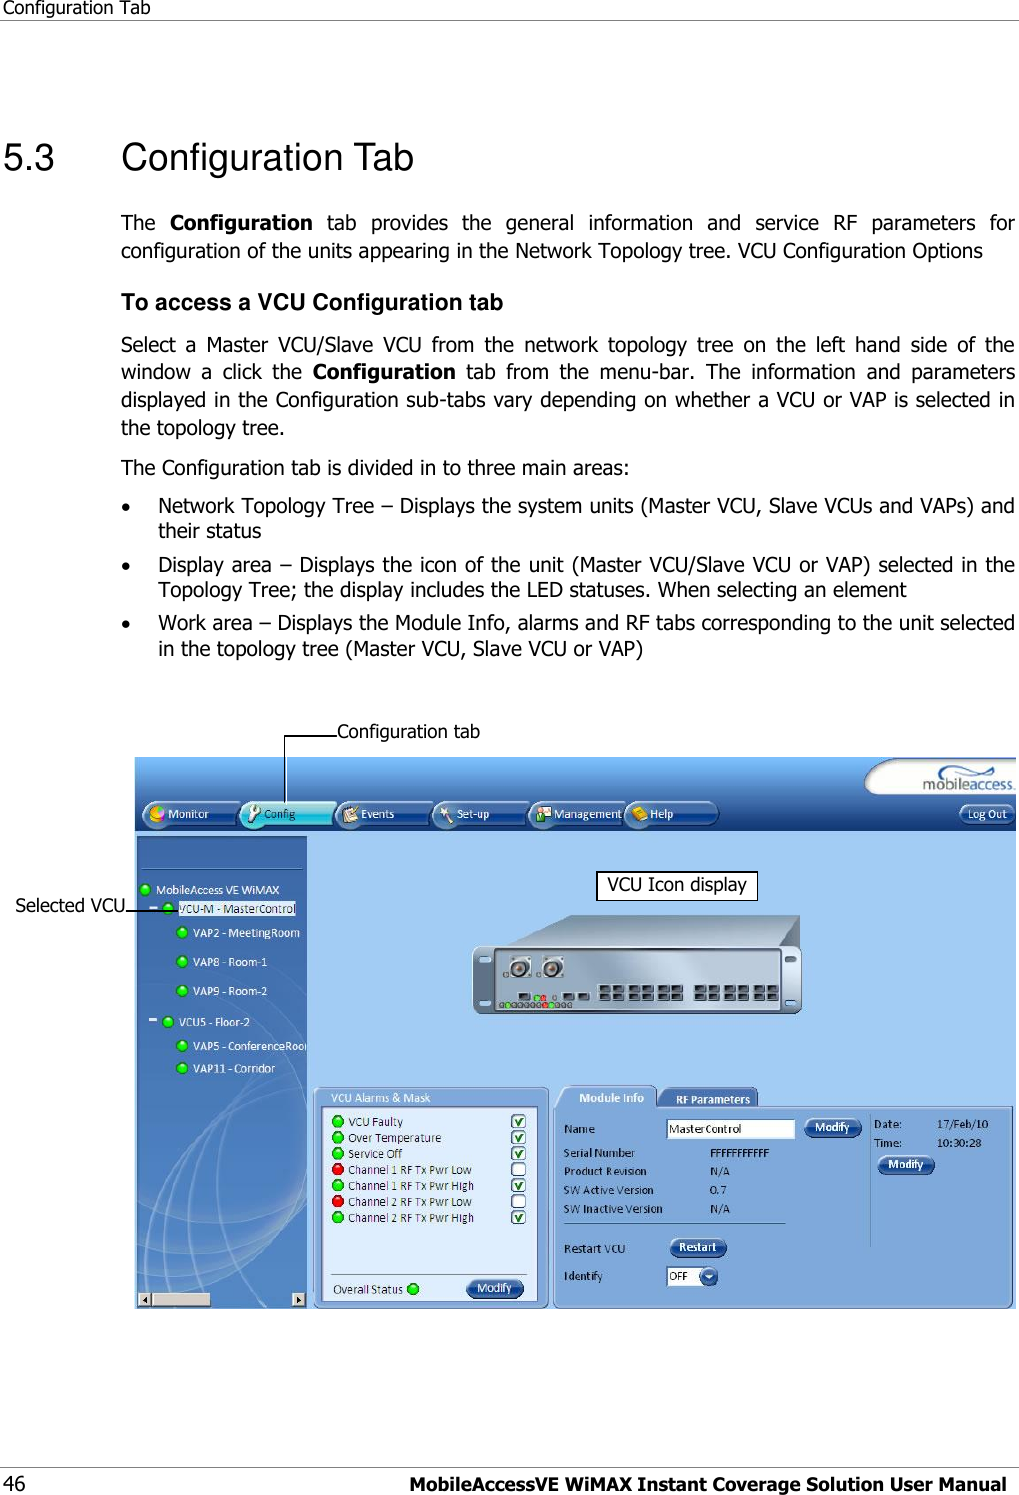 Configuration Tab 46 MobileAccessVE WiMAX Instant Coverage Solution User Manual  5.3  Configuration Tab The  Configuration  tab  provides  the  general  information  and  service  RF  parameters  for configuration of the units appearing in the Network Topology tree. VCU Configuration Options To access a VCU Configuration tab Select  a  Master  VCU/Slave  VCU  from  the  network  topology  tree  on  the  left  hand  side  of  the window  a  click  the  Configuration  tab  from  the  menu-bar.  The  information  and  parameters displayed in the Configuration sub-tabs vary depending on whether a VCU or VAP is selected in the topology tree. The Configuration tab is divided in to three main areas:  Network Topology Tree – Displays the system units (Master VCU, Slave VCUs and VAPs) and their status  Display area – Displays the icon of the unit (Master VCU/Slave VCU or VAP) selected in the Topology Tree; the display includes the LED statuses. When selecting an element    Work area – Displays the Module Info, alarms and RF tabs corresponding to the unit selected in the topology tree (Master VCU, Slave VCU or VAP)     Selected VCU VCU Icon display Configuration tab  